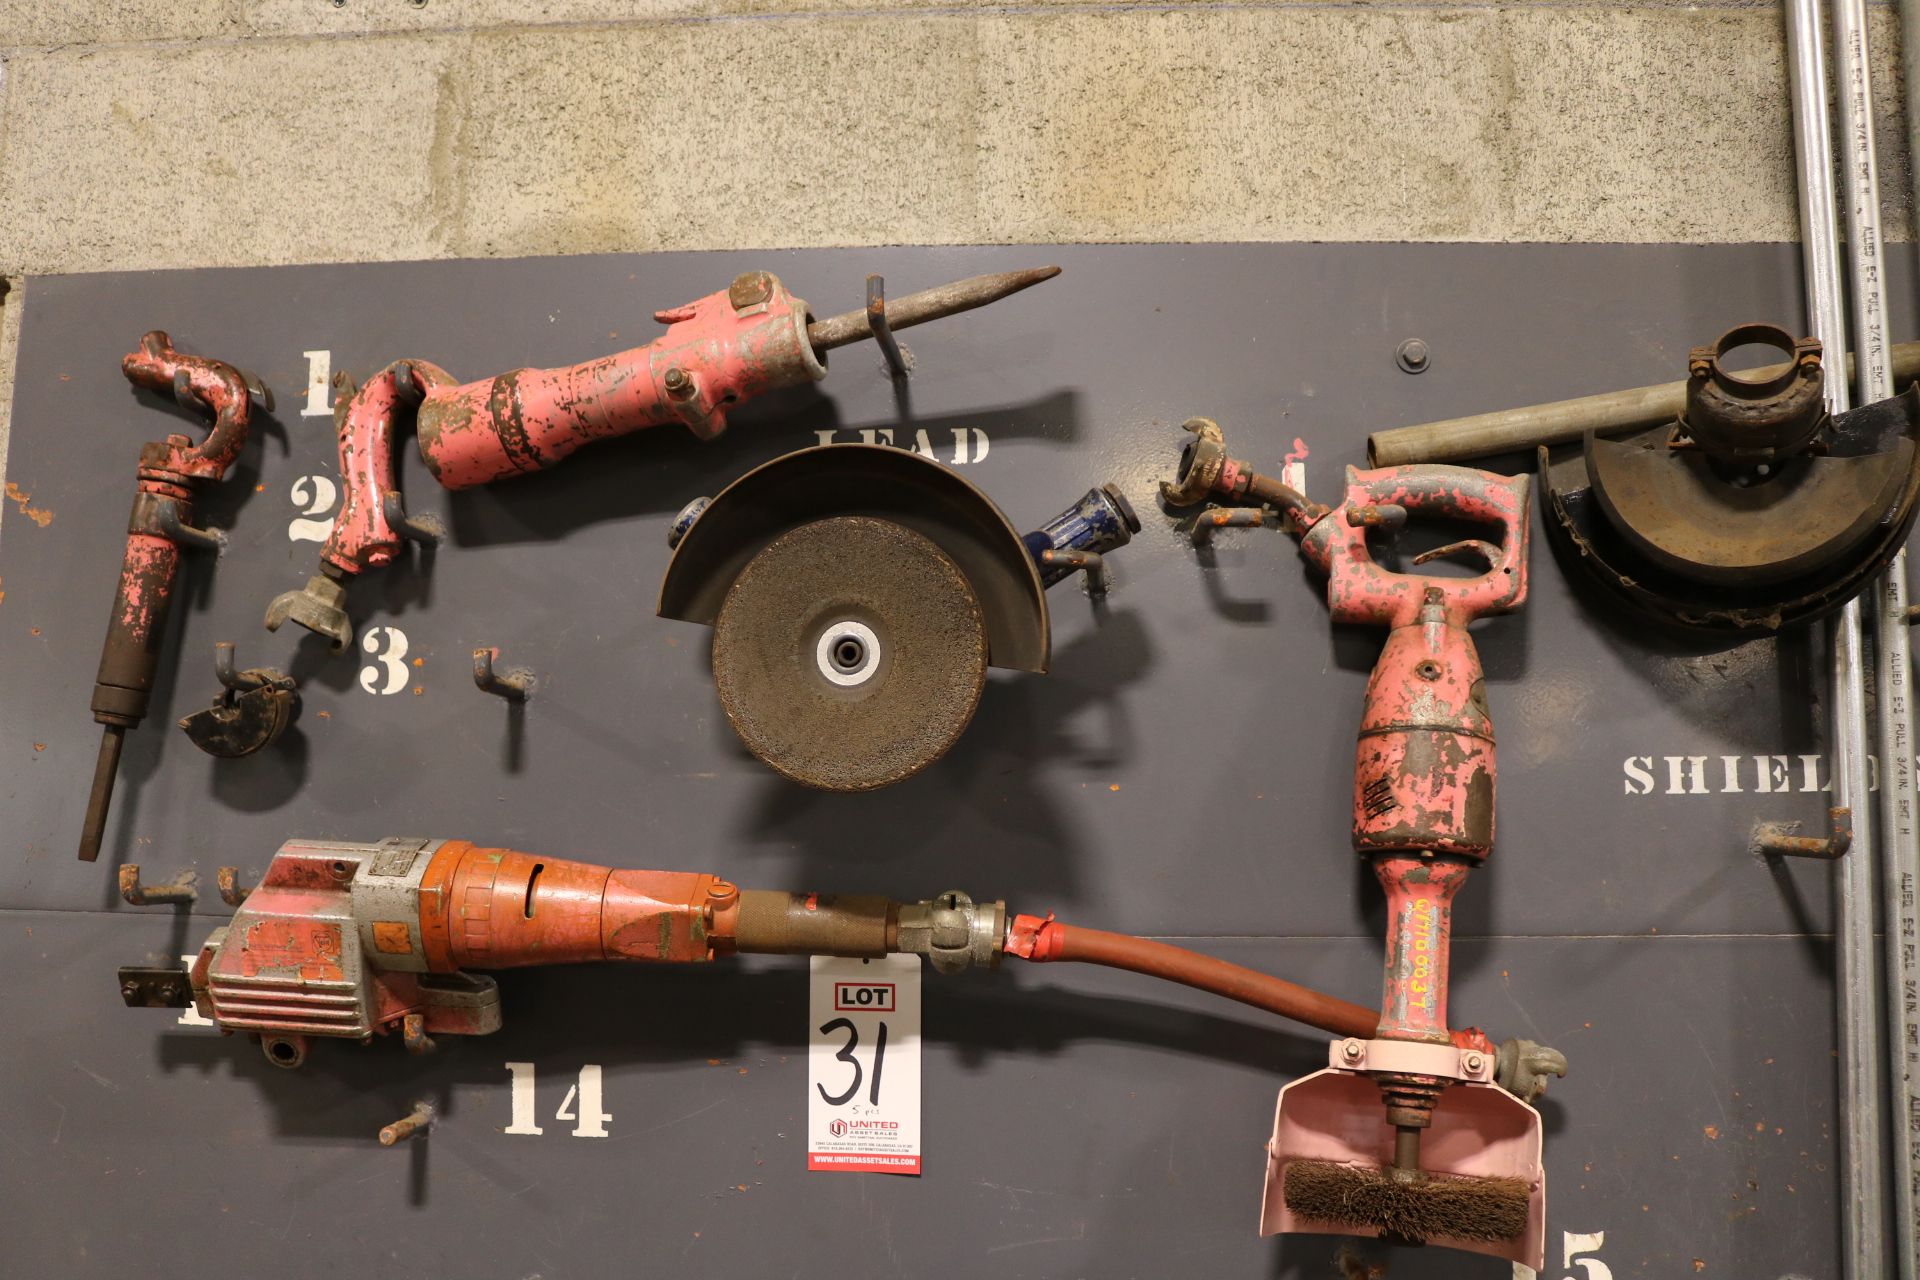 LOT - (5) PNEUMATIC TOOLS: (2) CHISELS, (2) GRINDERS AND (1) RECIPROCATING SAW